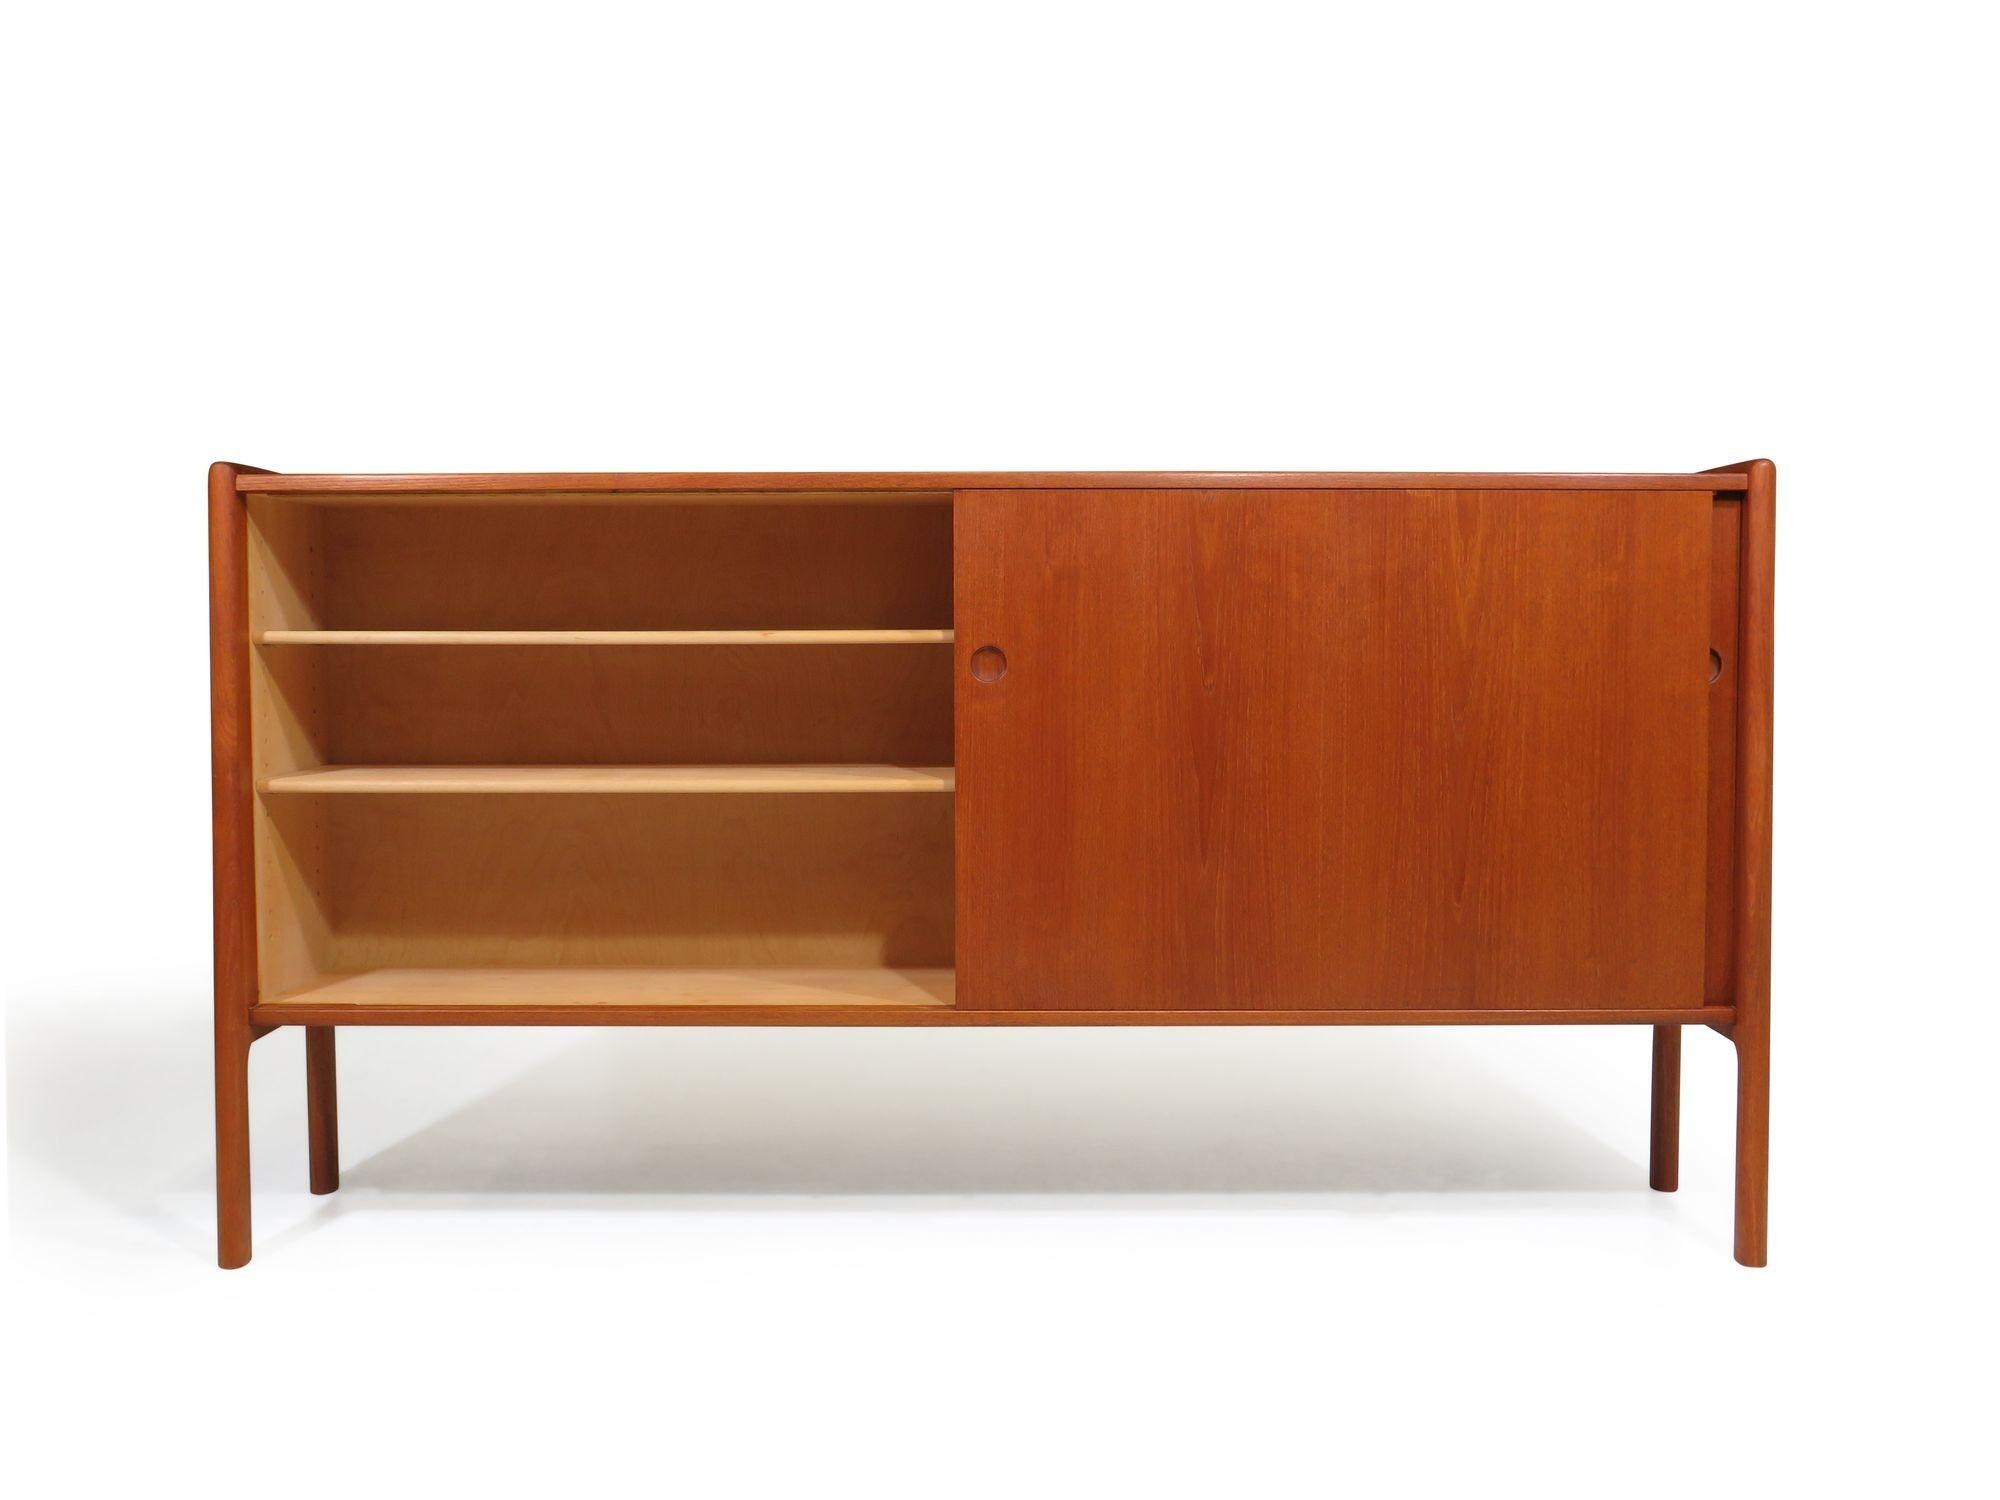 Teak credenza designed by Hans Wegner with two sliding doors revealing an interior of white oak with adjustable shelves; raised on solid teak legs. The cabinet has been professionally restored in a natural oil finish with minor signs of age and use.